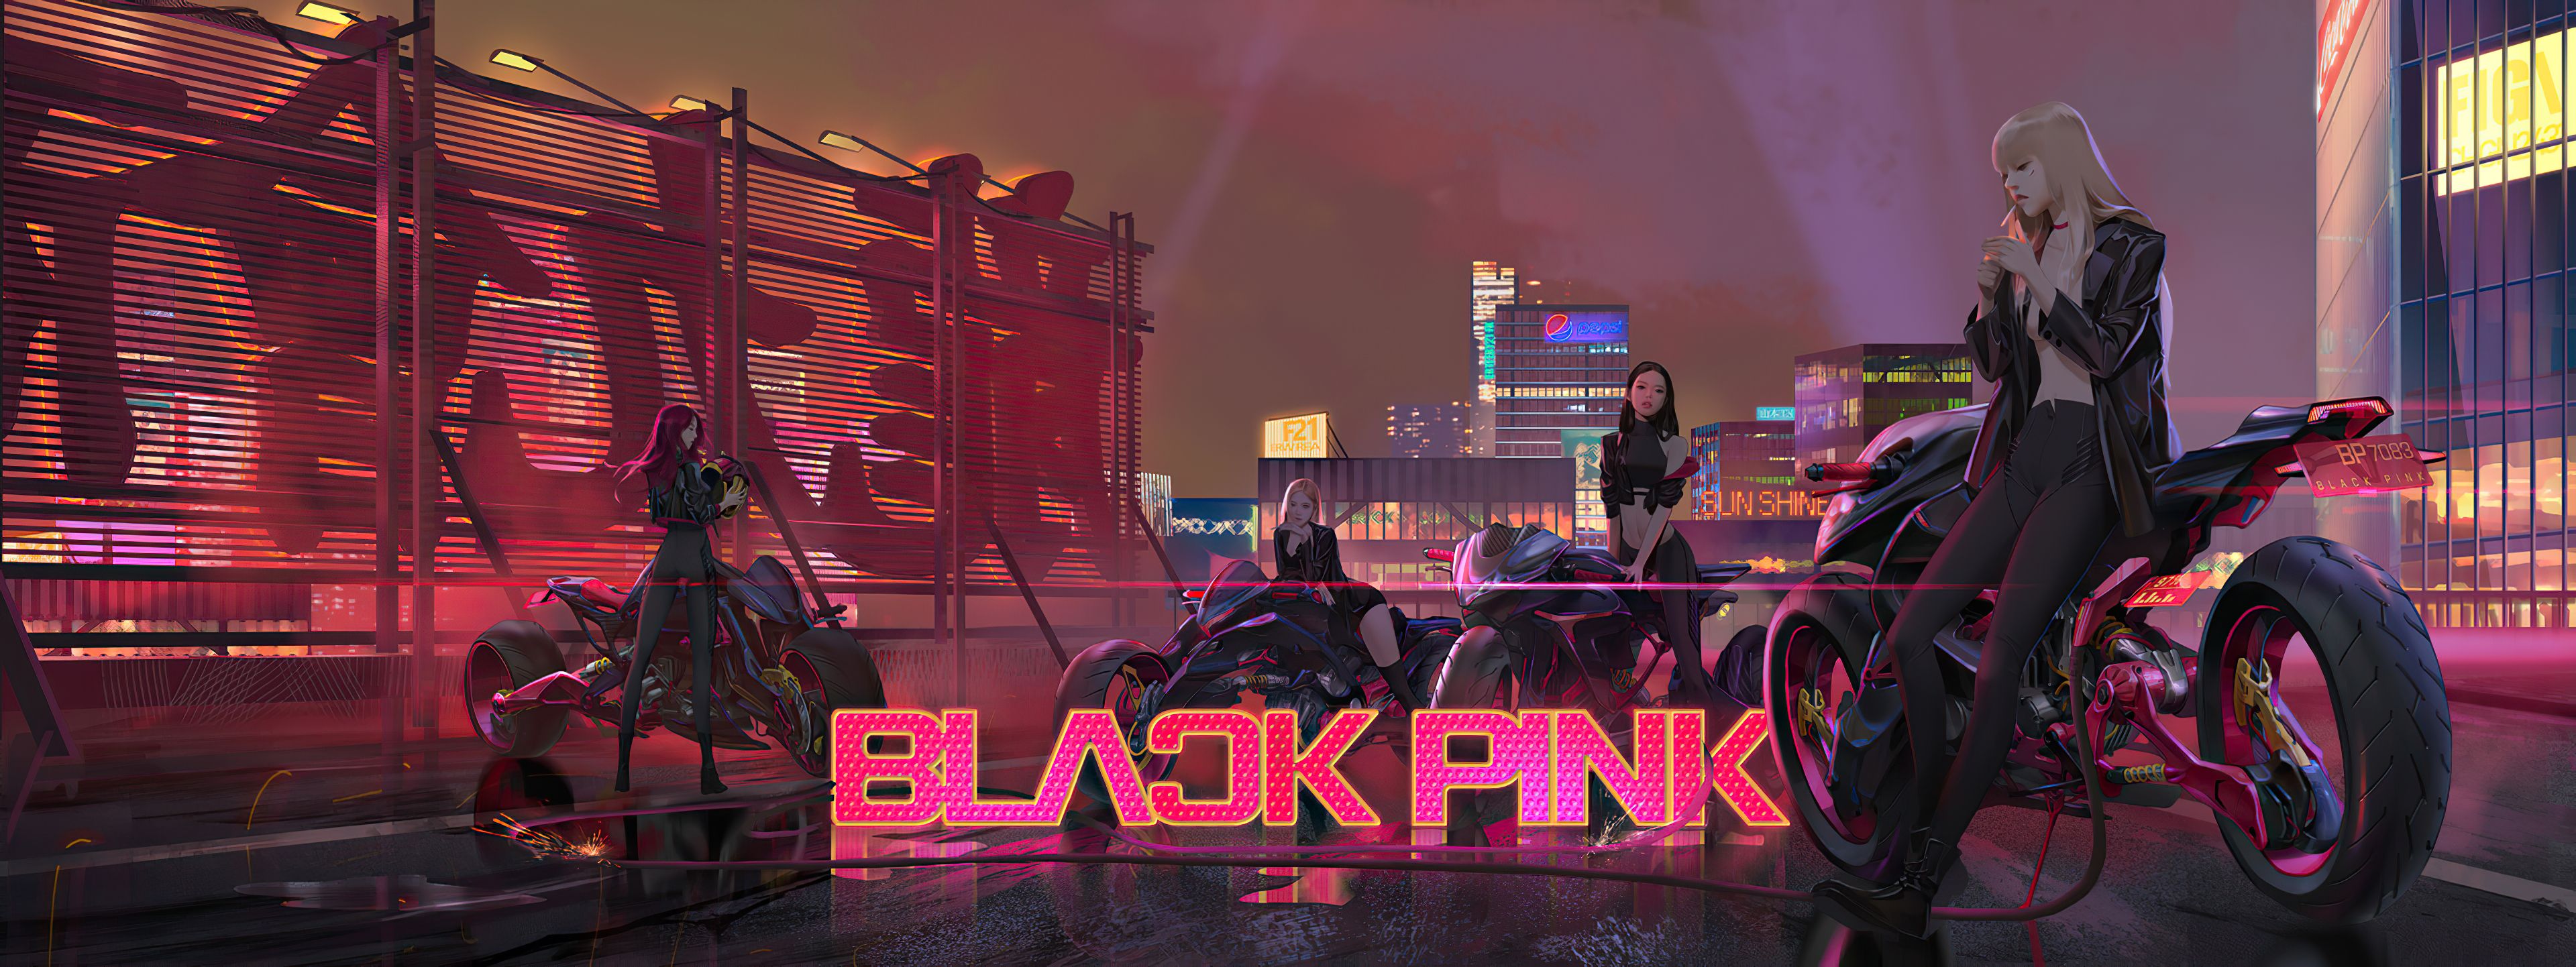 Blackpink 4k, HD Music, 4k Wallpaper, Image, Background, Photo and Picture